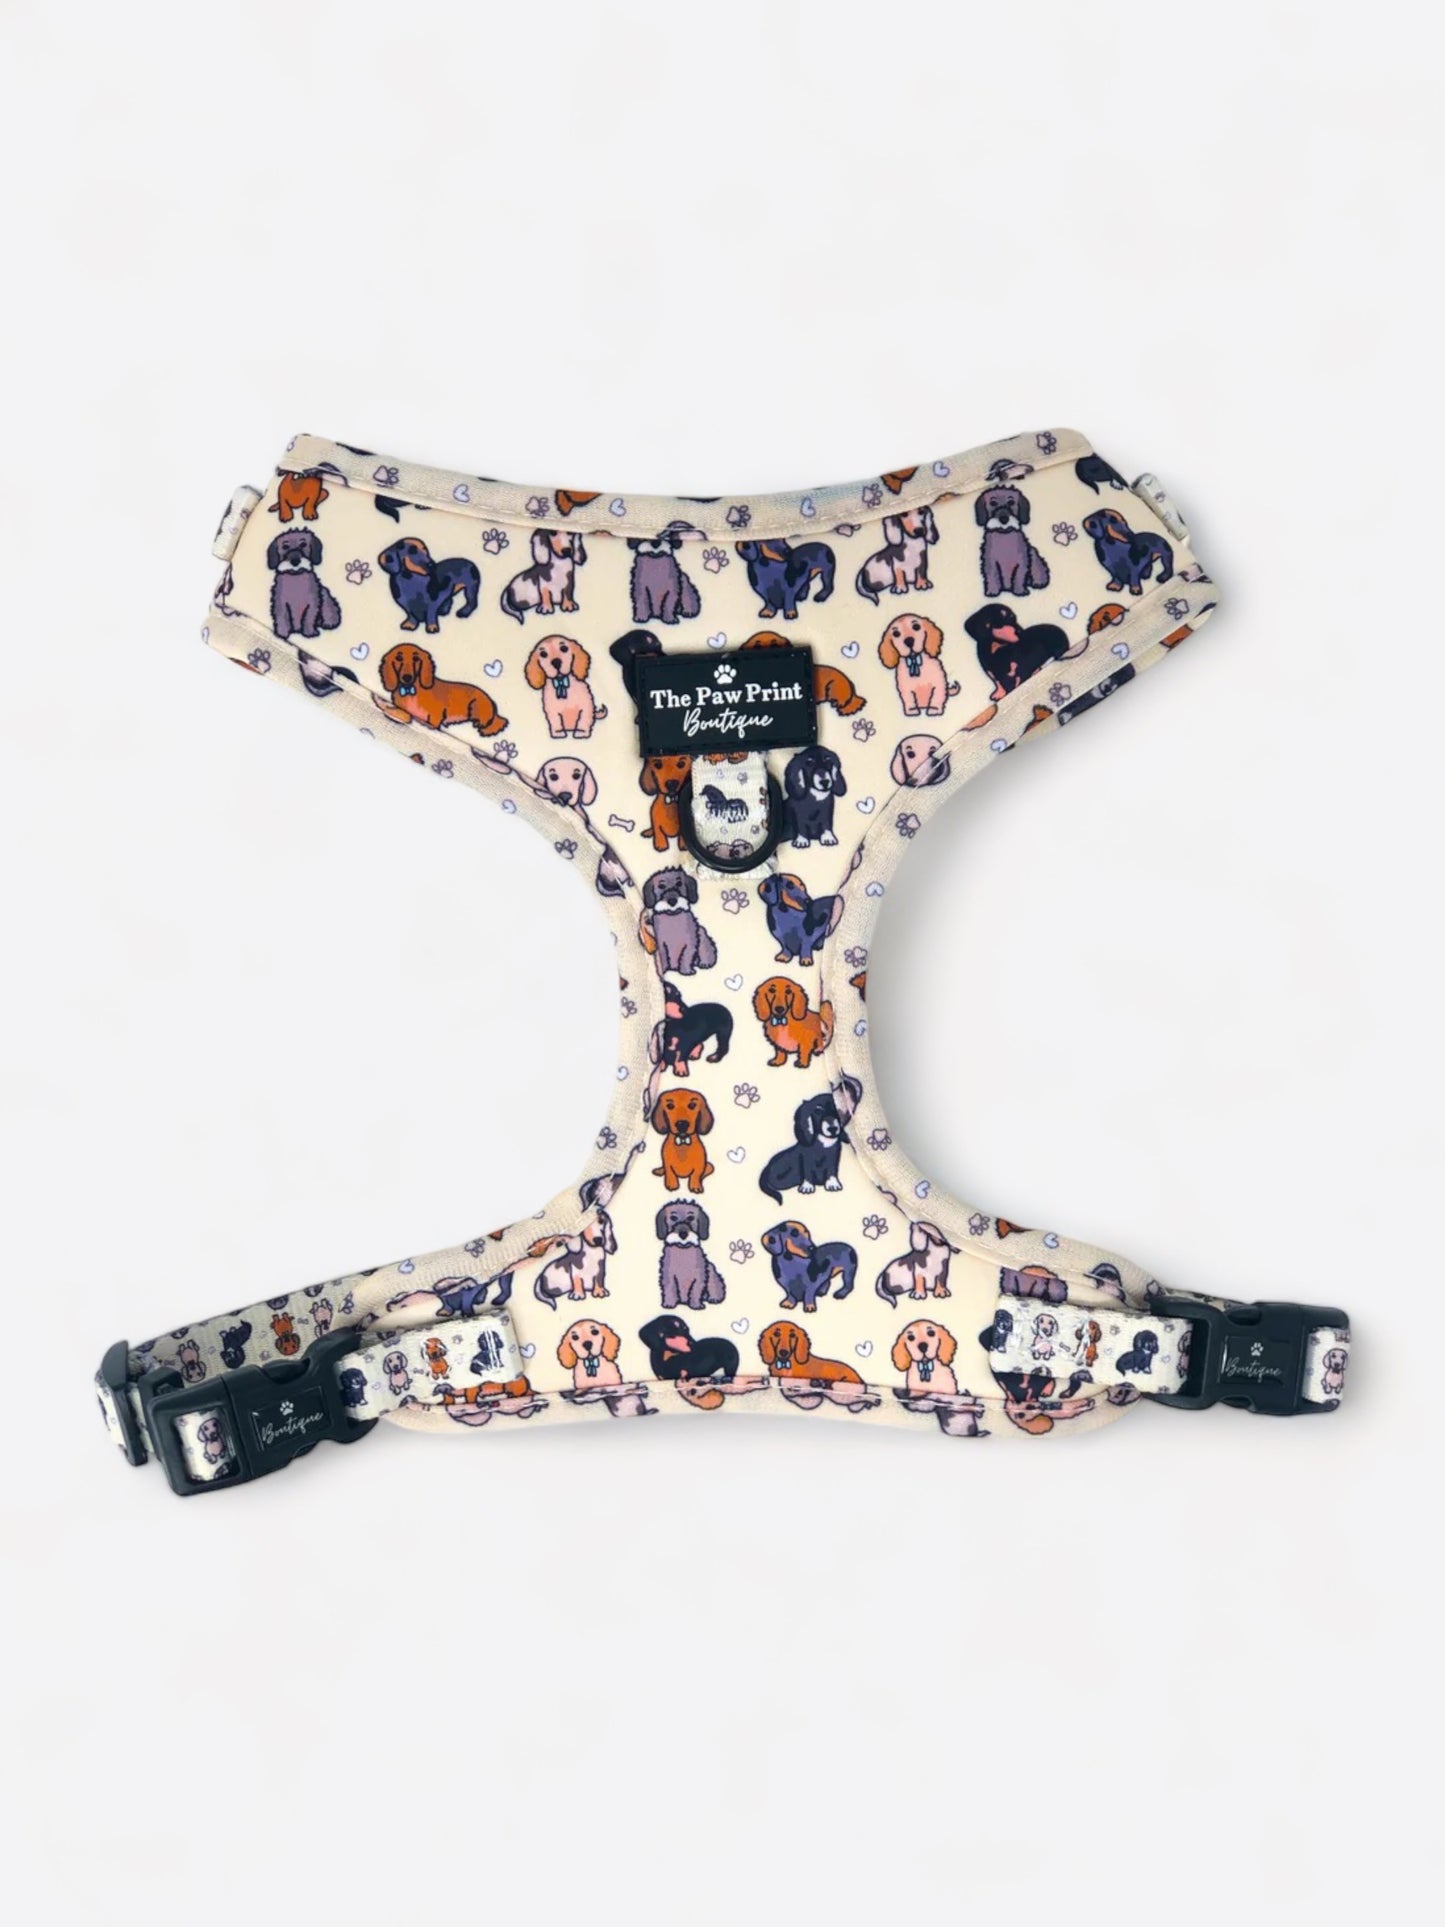 The Dachshund Adjustable Harness